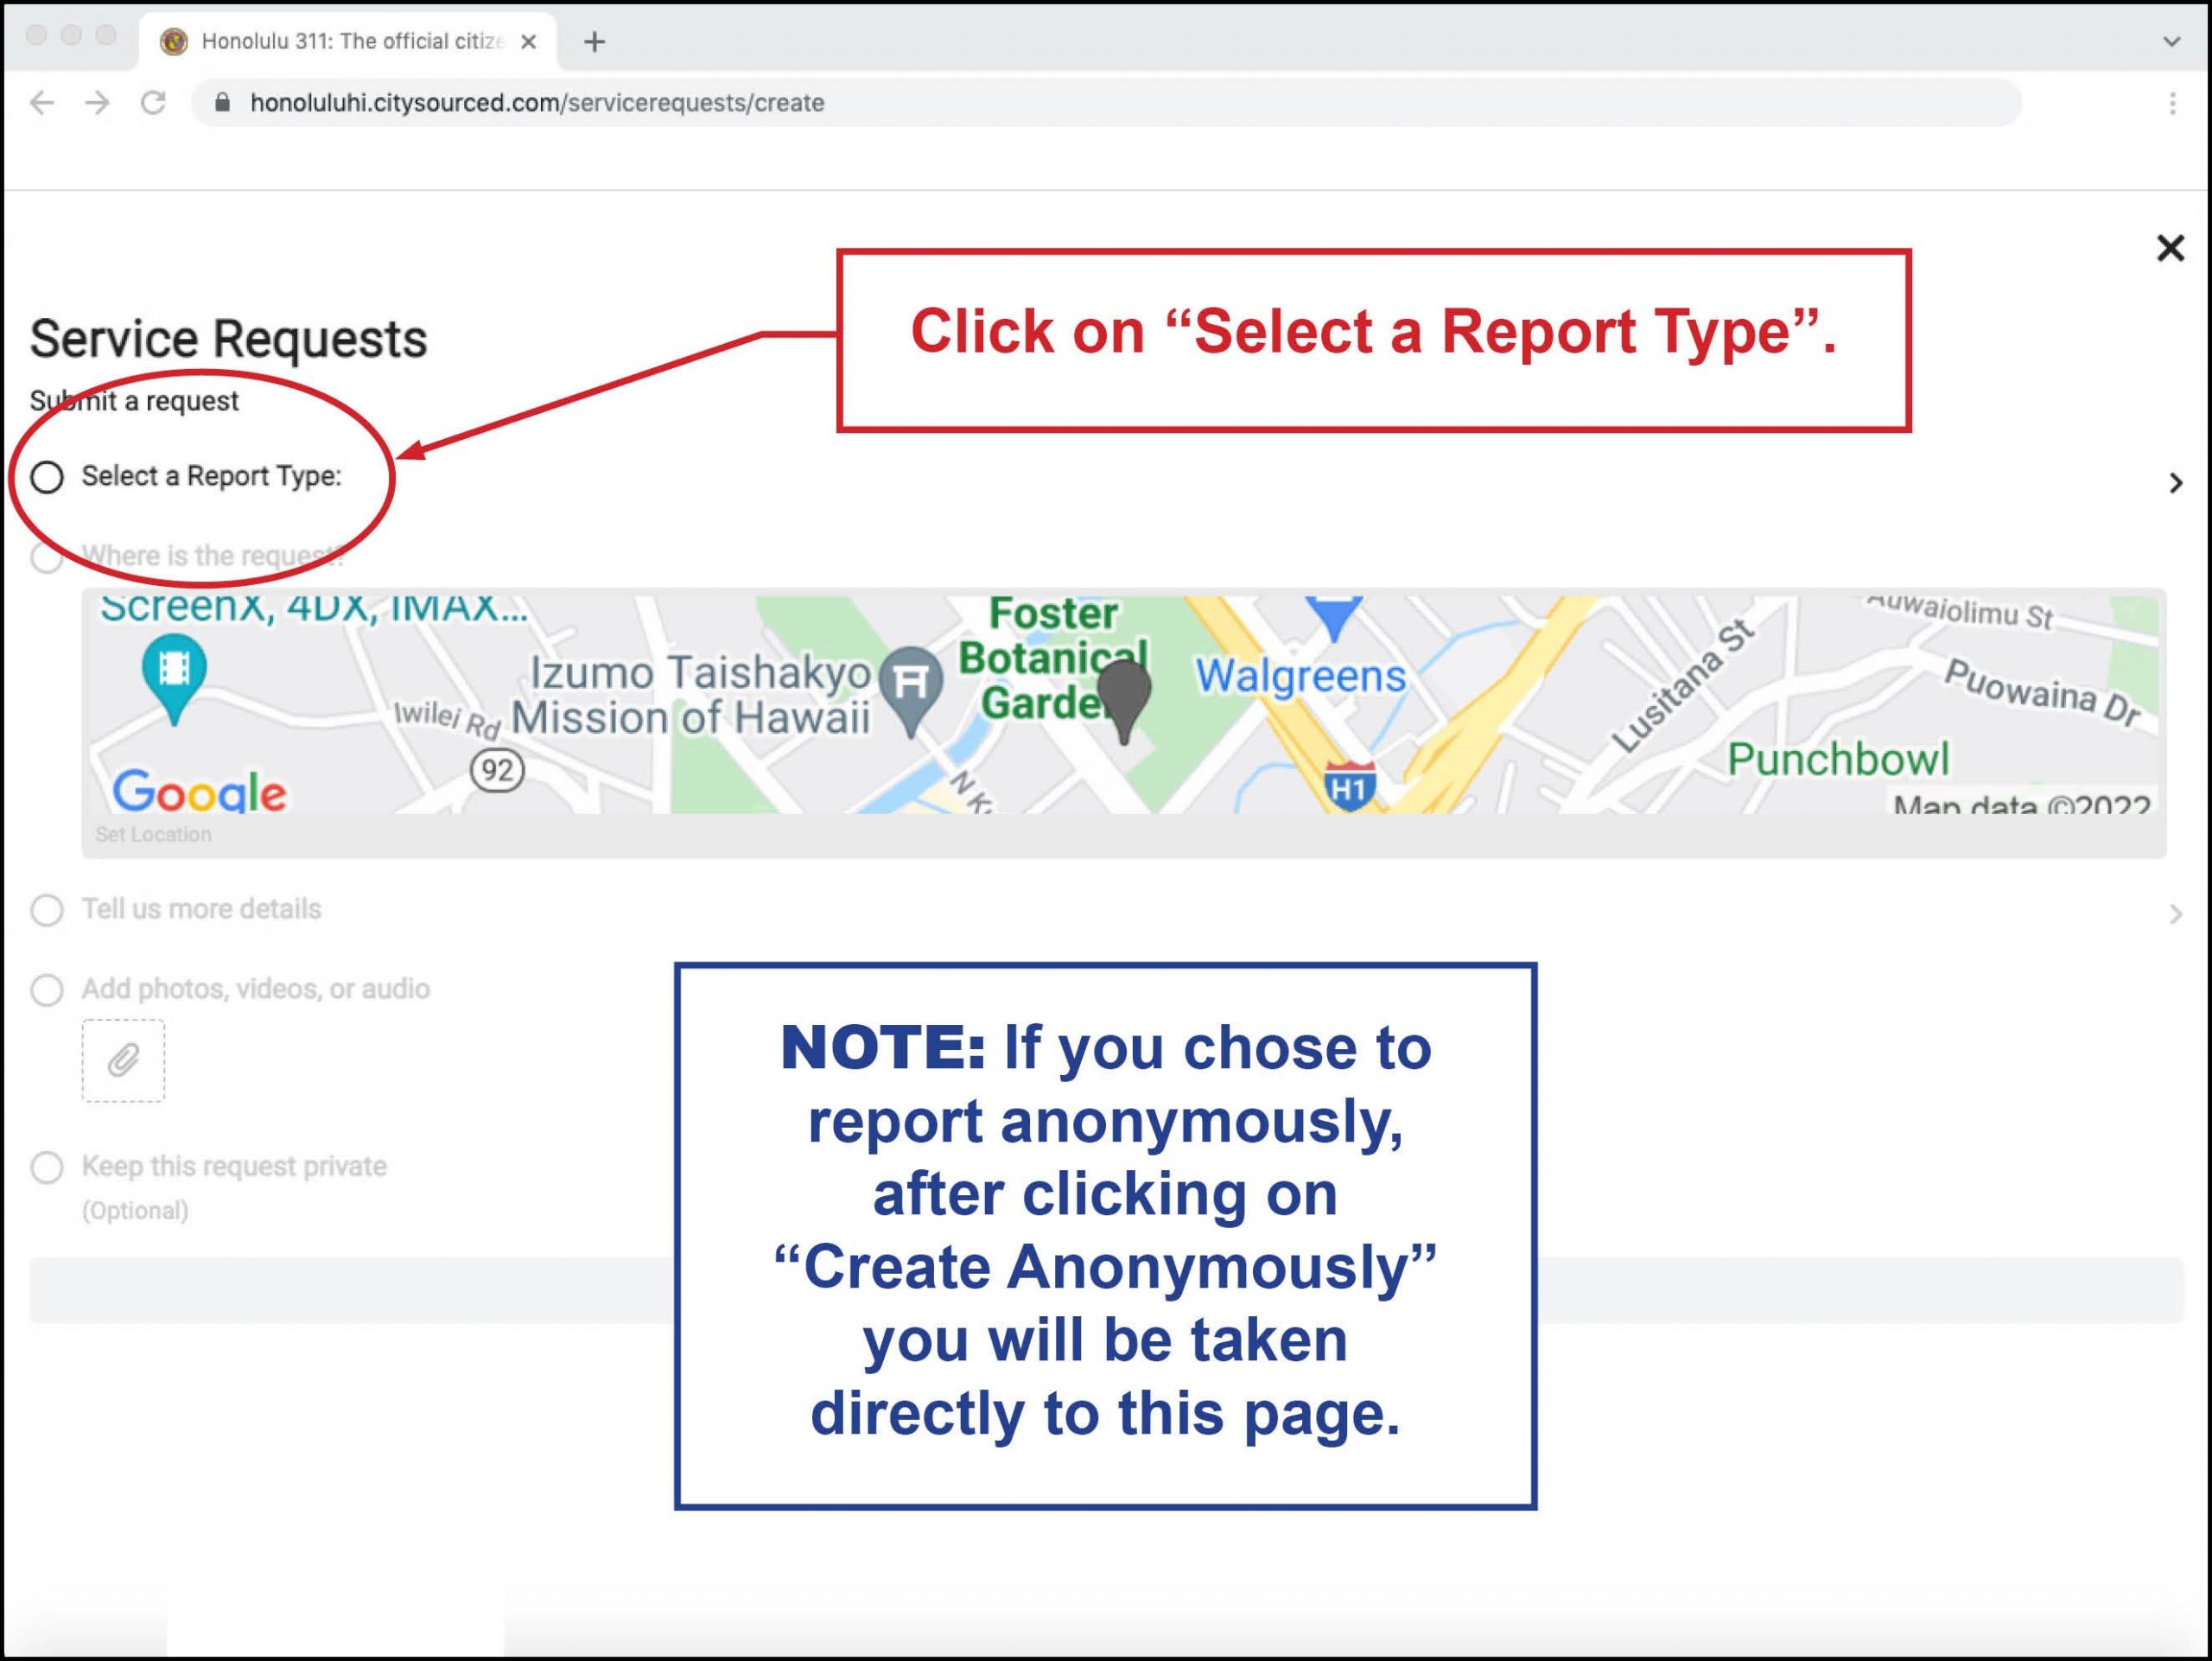 Click on "Select a Report Type". NOTE: If you choose to report anonymously, after clicking on "Create Anonymously" you will be taken directly to this page.